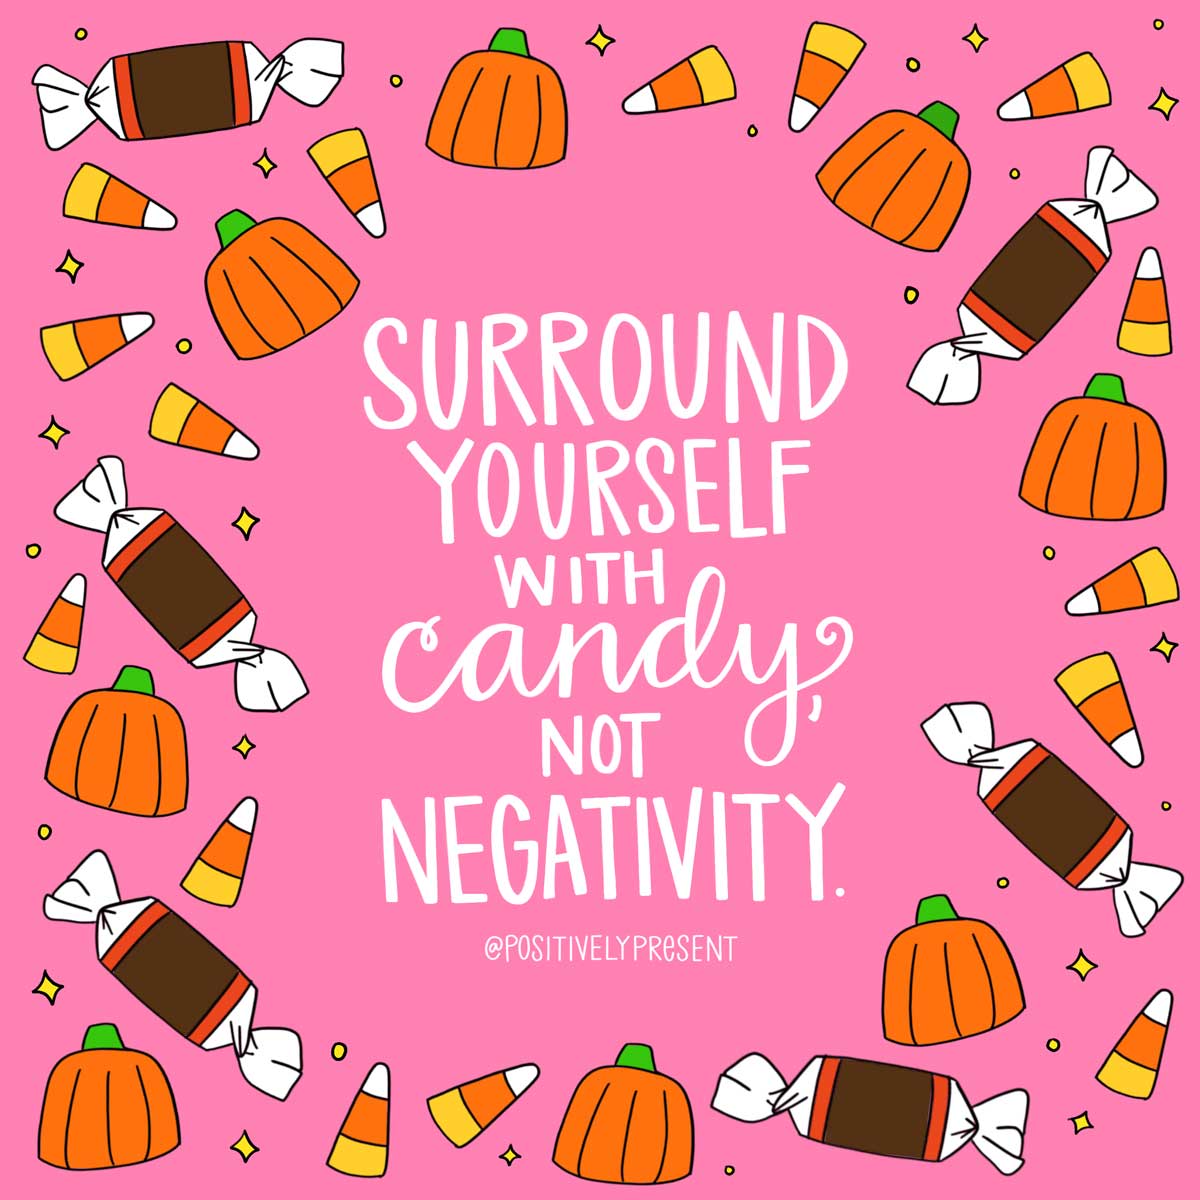 Surround yourself with candy, not negativity quote with drawing of candies.